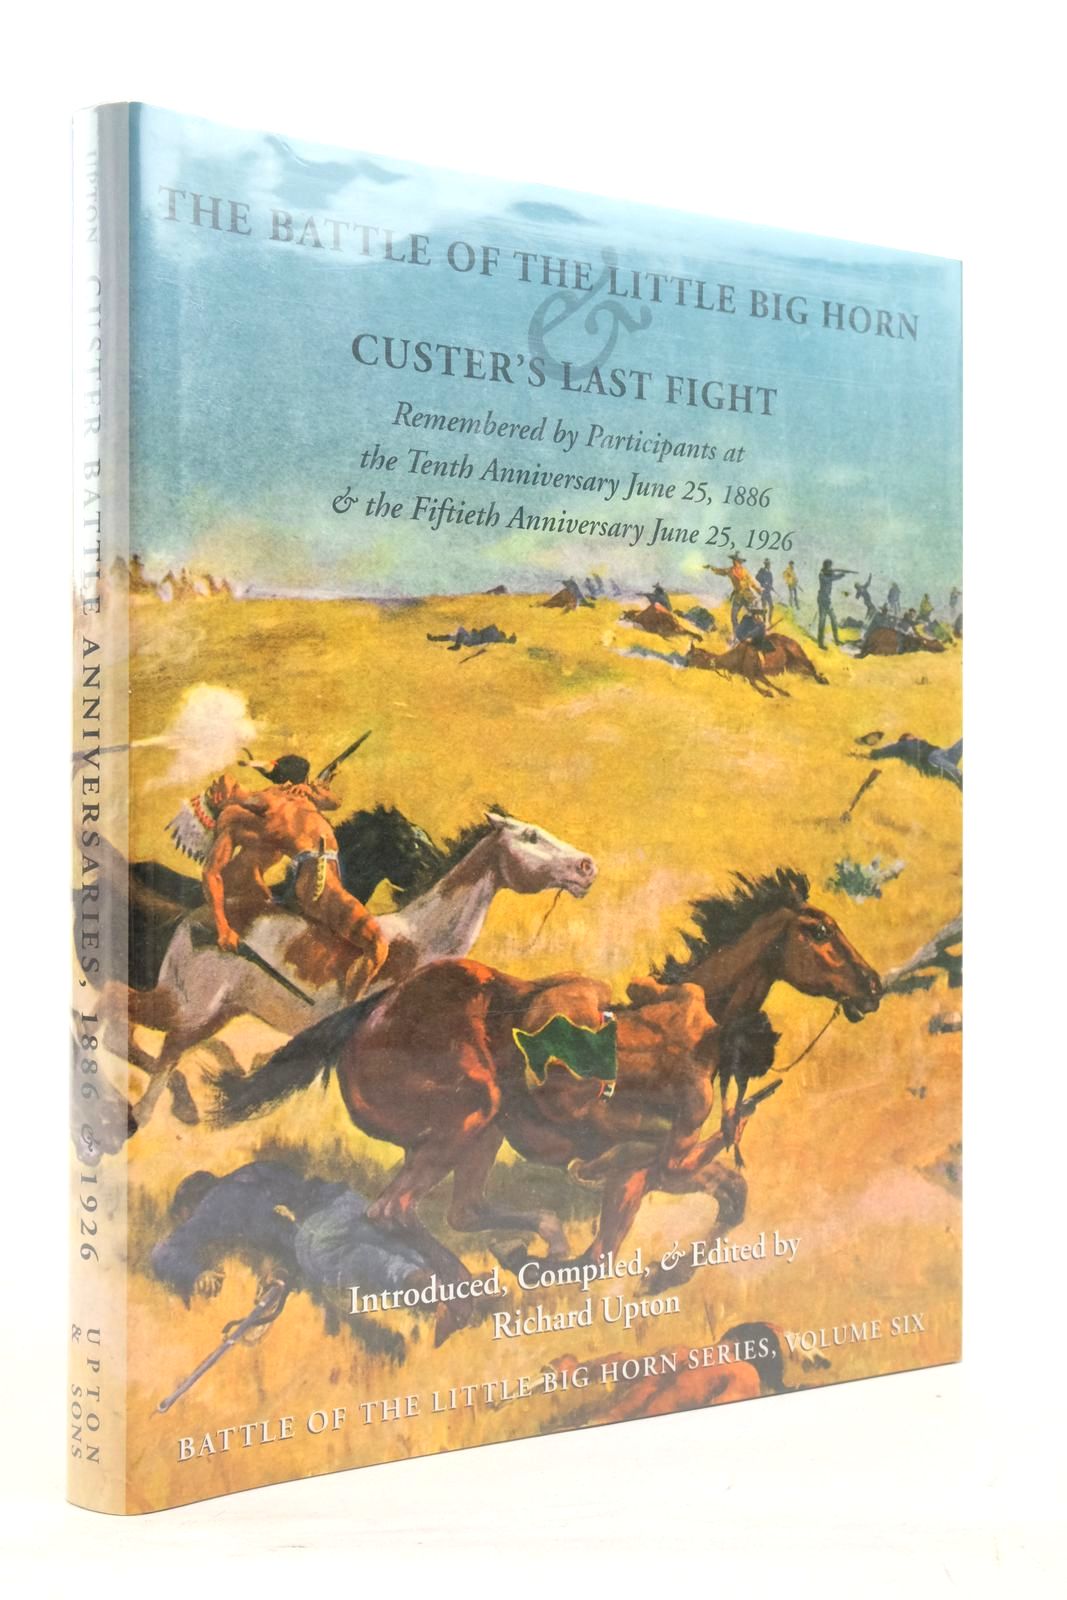 The Battle of Little Big Horn and Custer